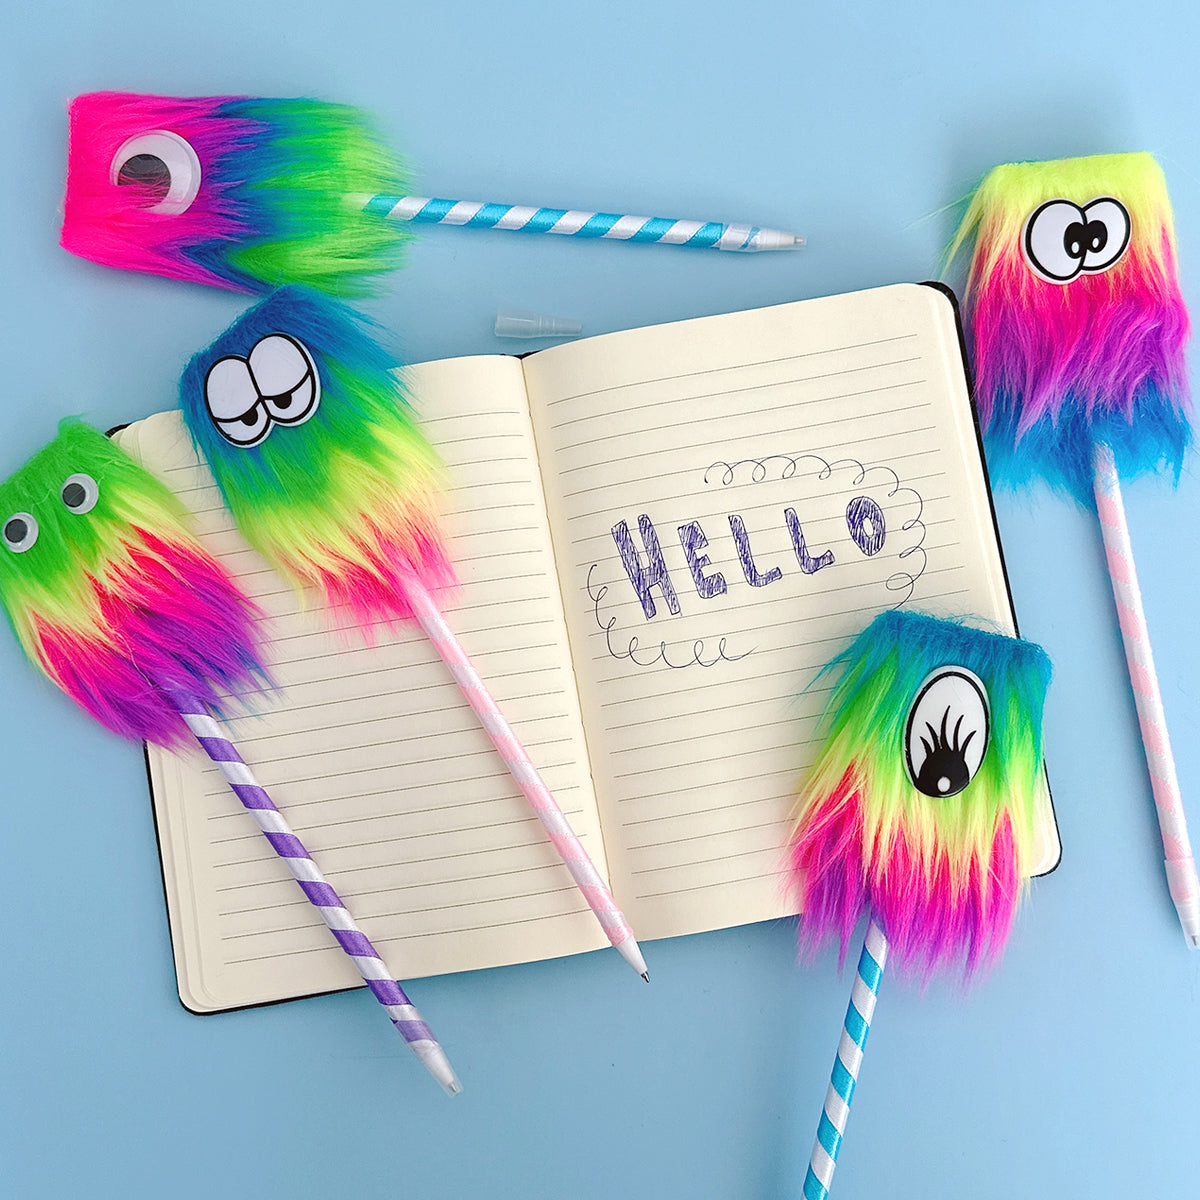  Ctosree 32 Pcs Rainbow Monster Pens and Cool Pens for Kids  Includes 20 Pcs Cute Fluffy Pens in 5 Styles and 12 Pcs Racing Car Pens  Novelty Pens Fun Pens